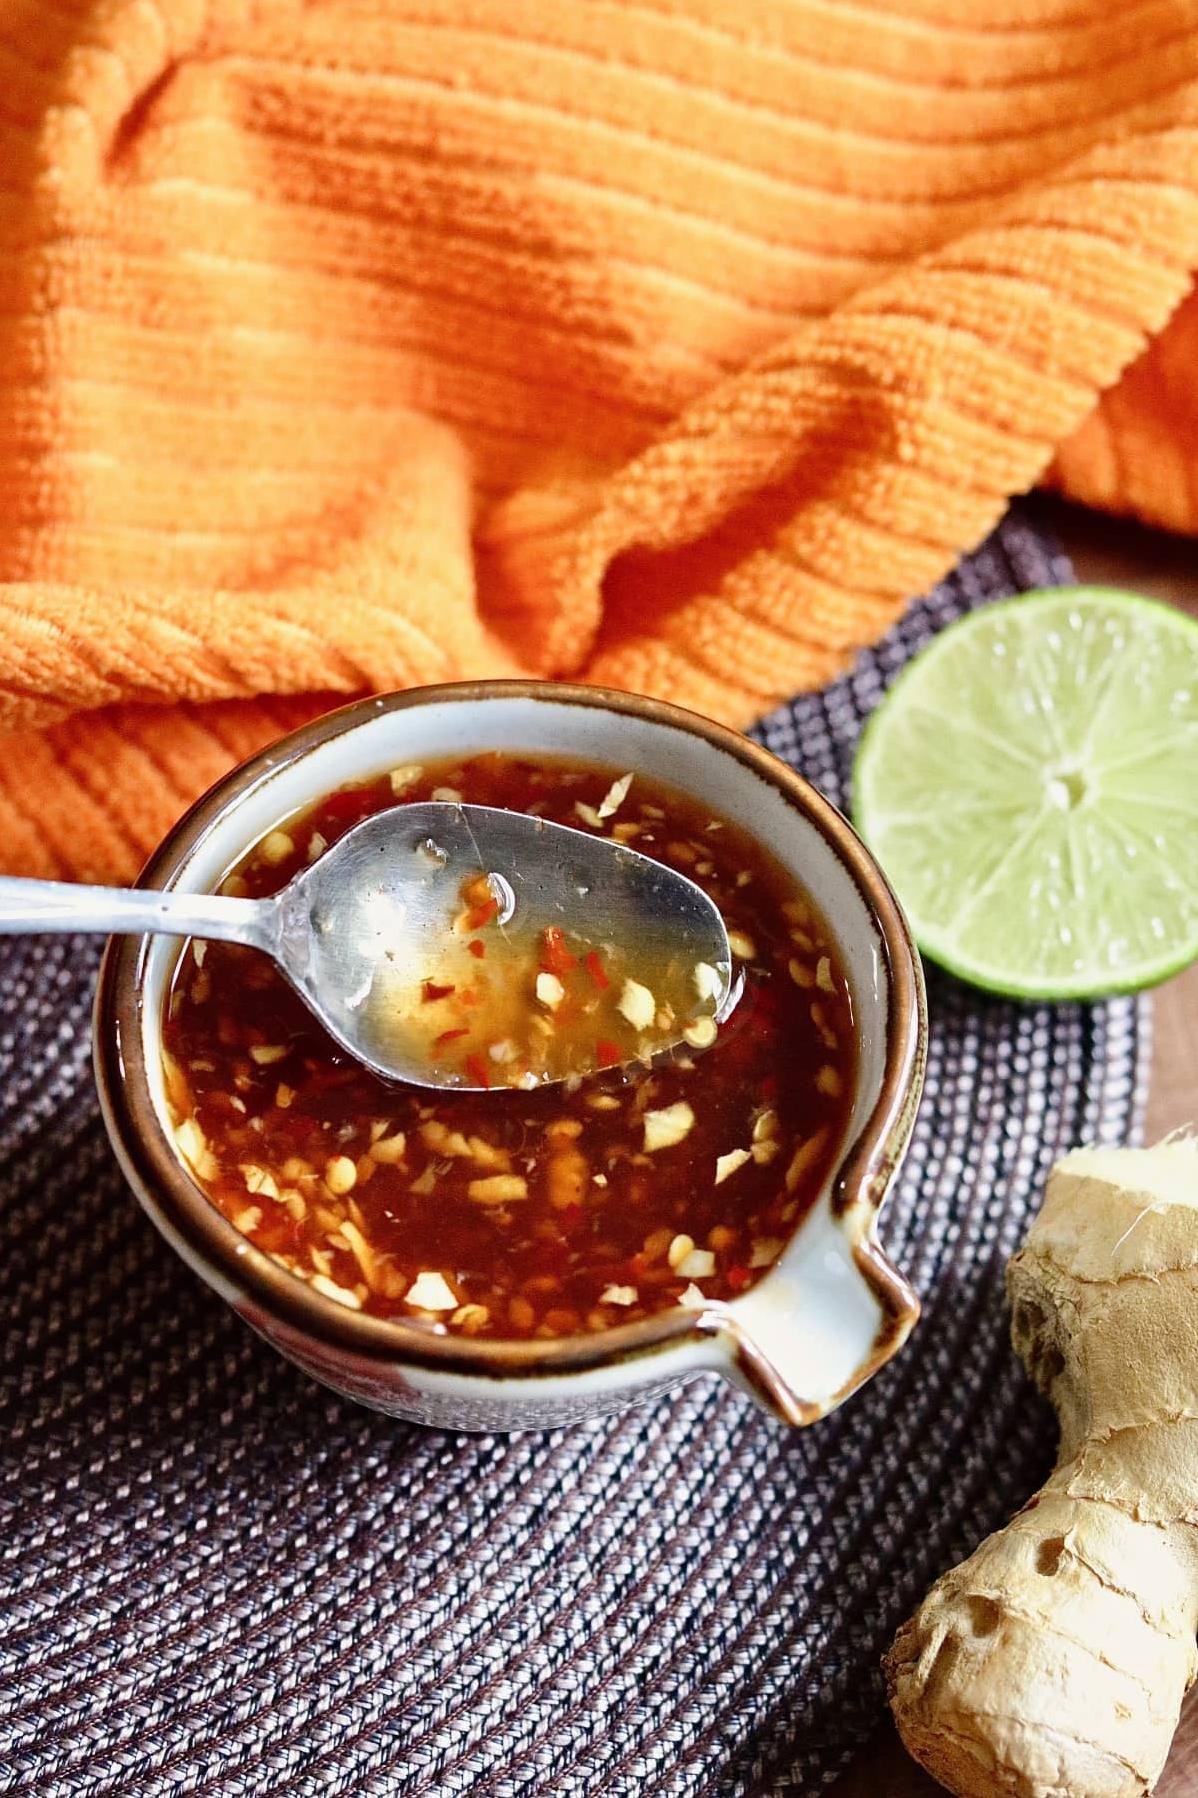  This dipping sauce will put some zing in your spring rolls.